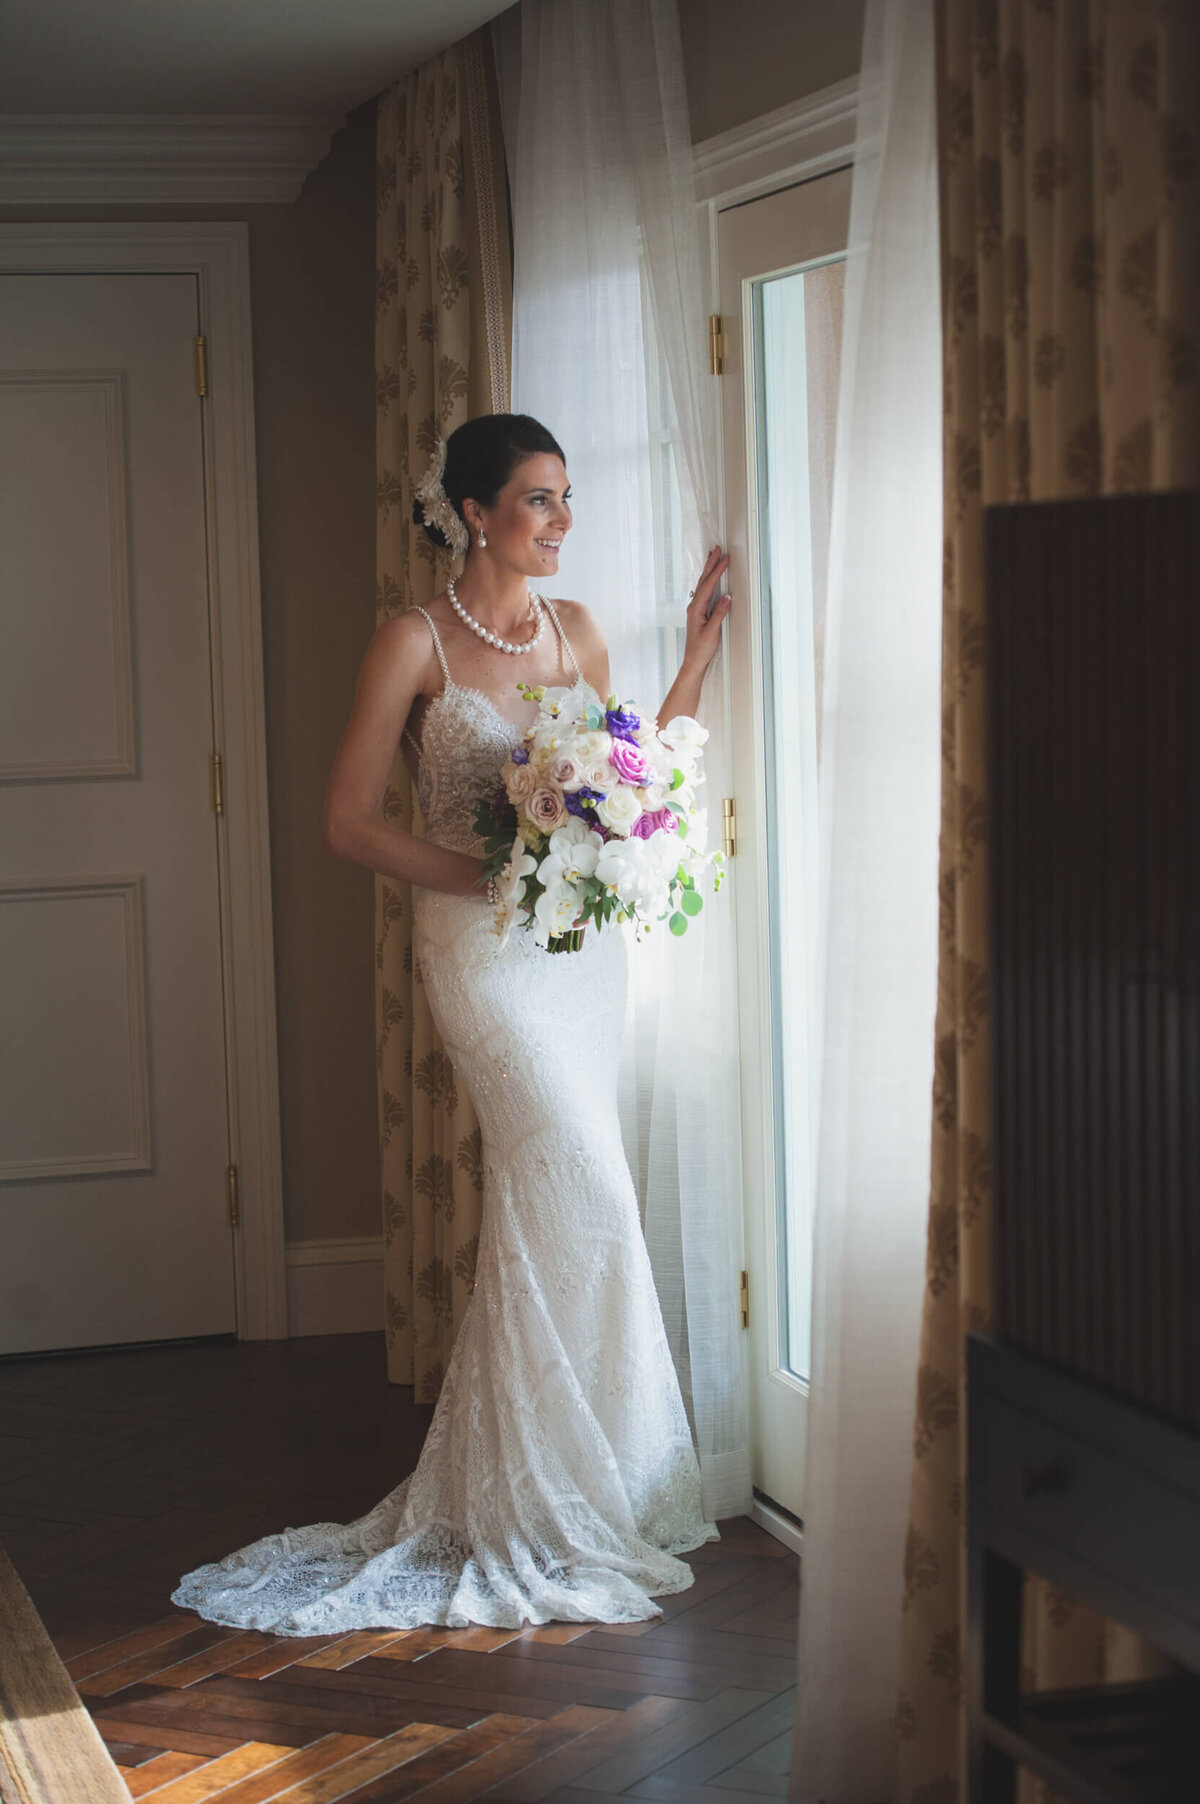 Bride happily gazing out the door of her bridal suite and eager to see her groom